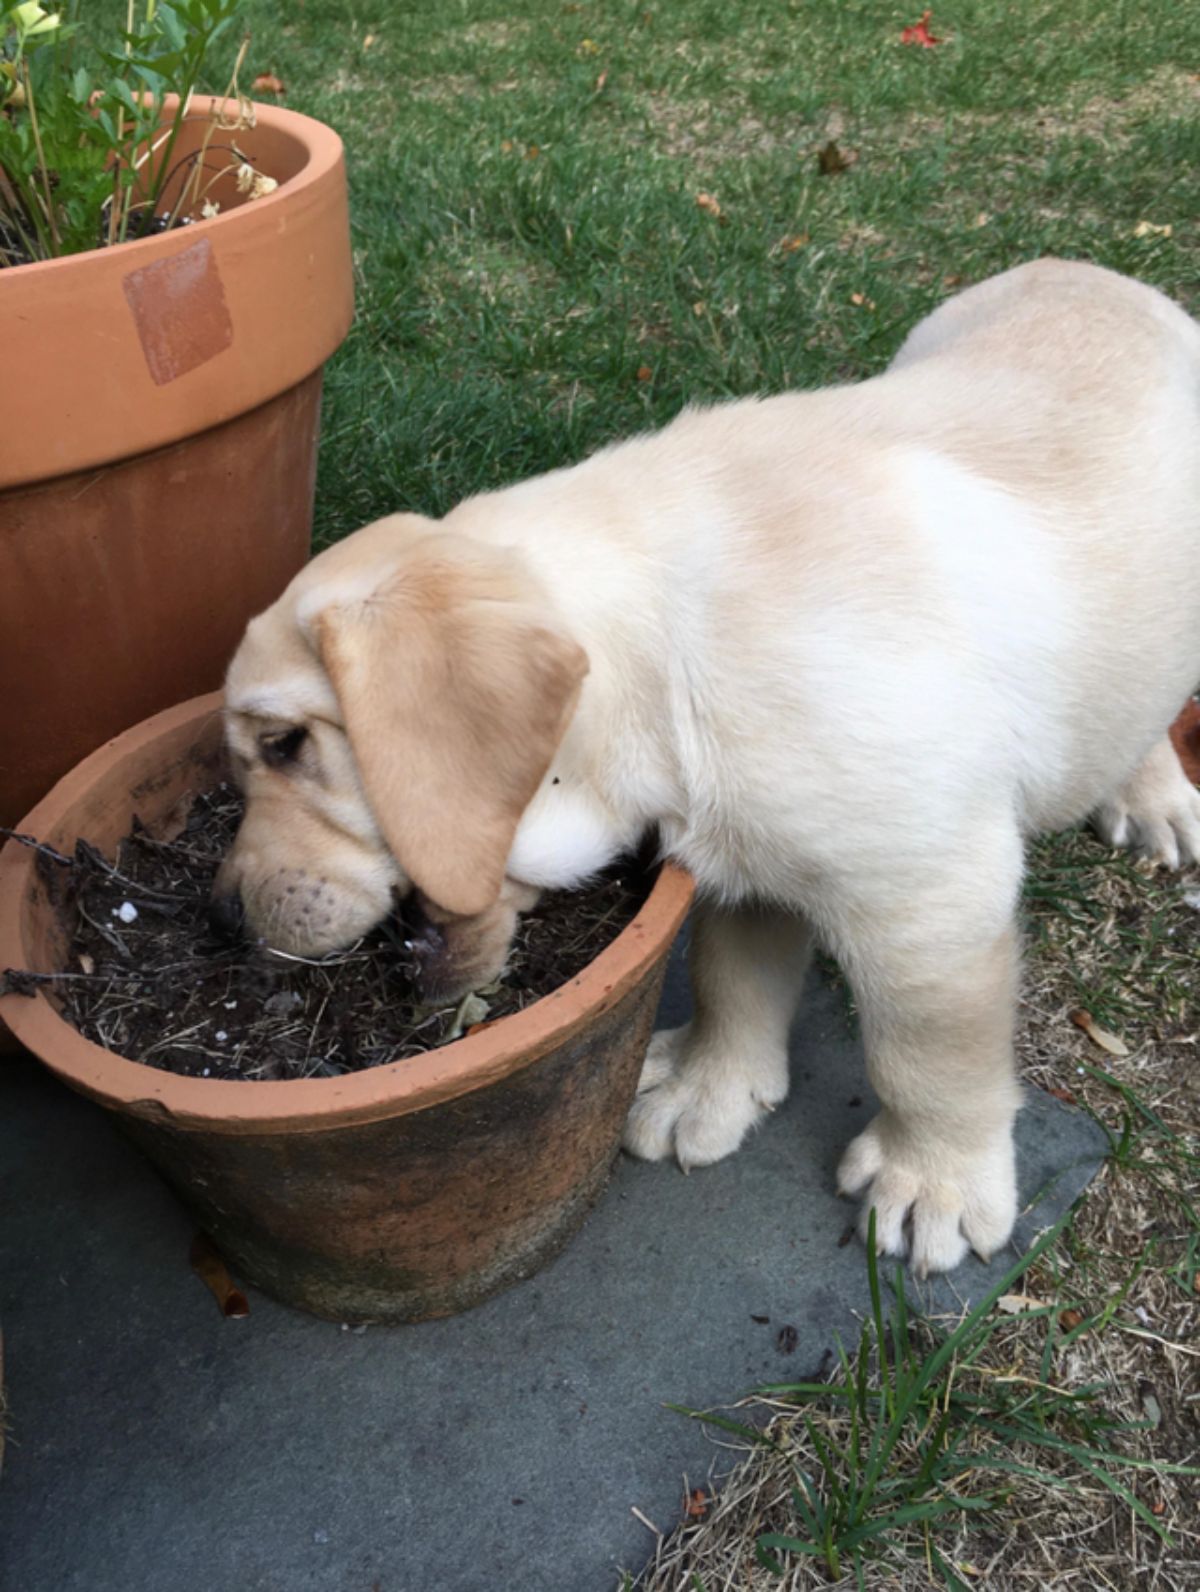 brown dog eating soil out of a brown plant pot